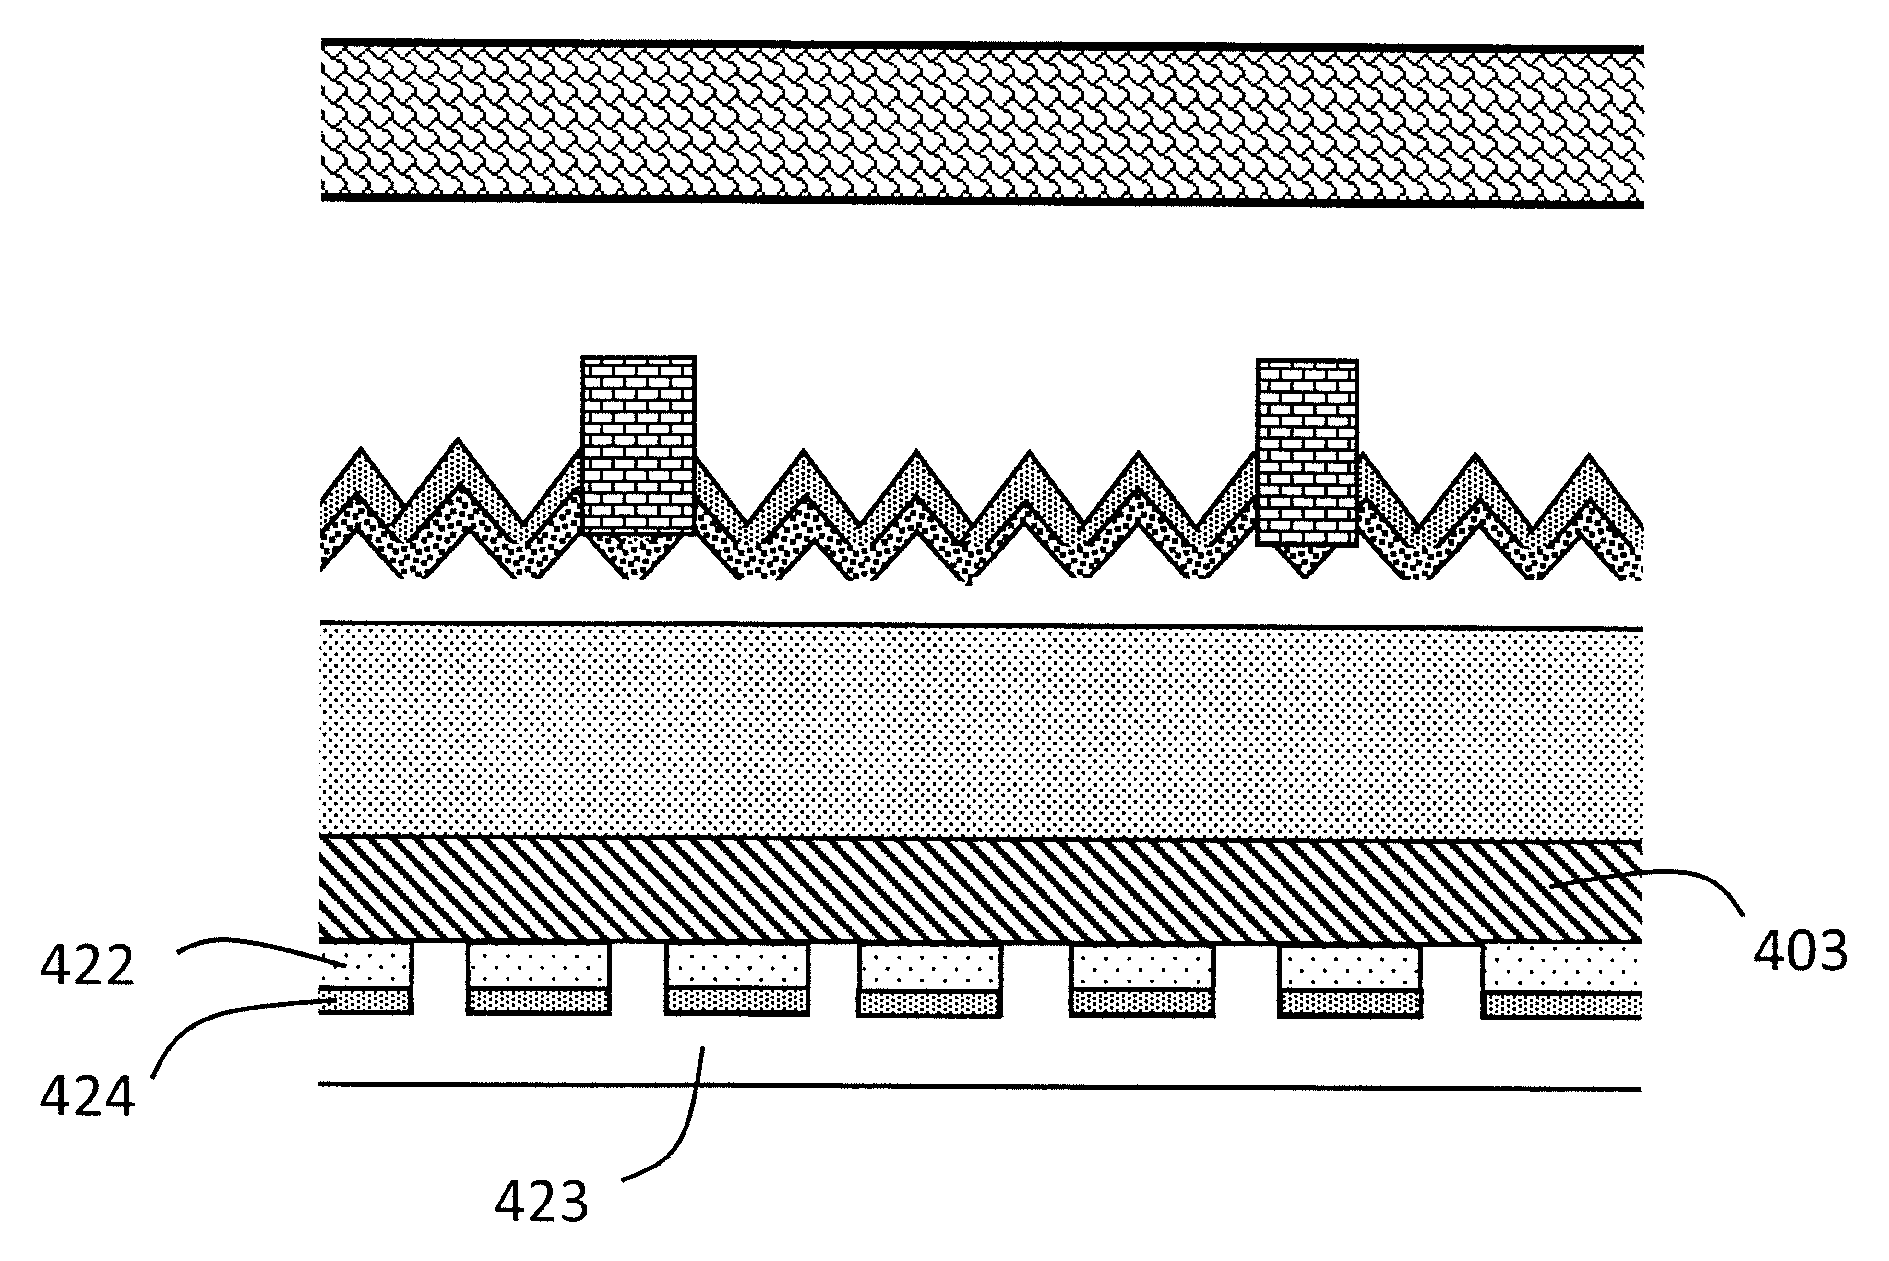 Passivated emitter rear locally patterned epitaxial solar cell